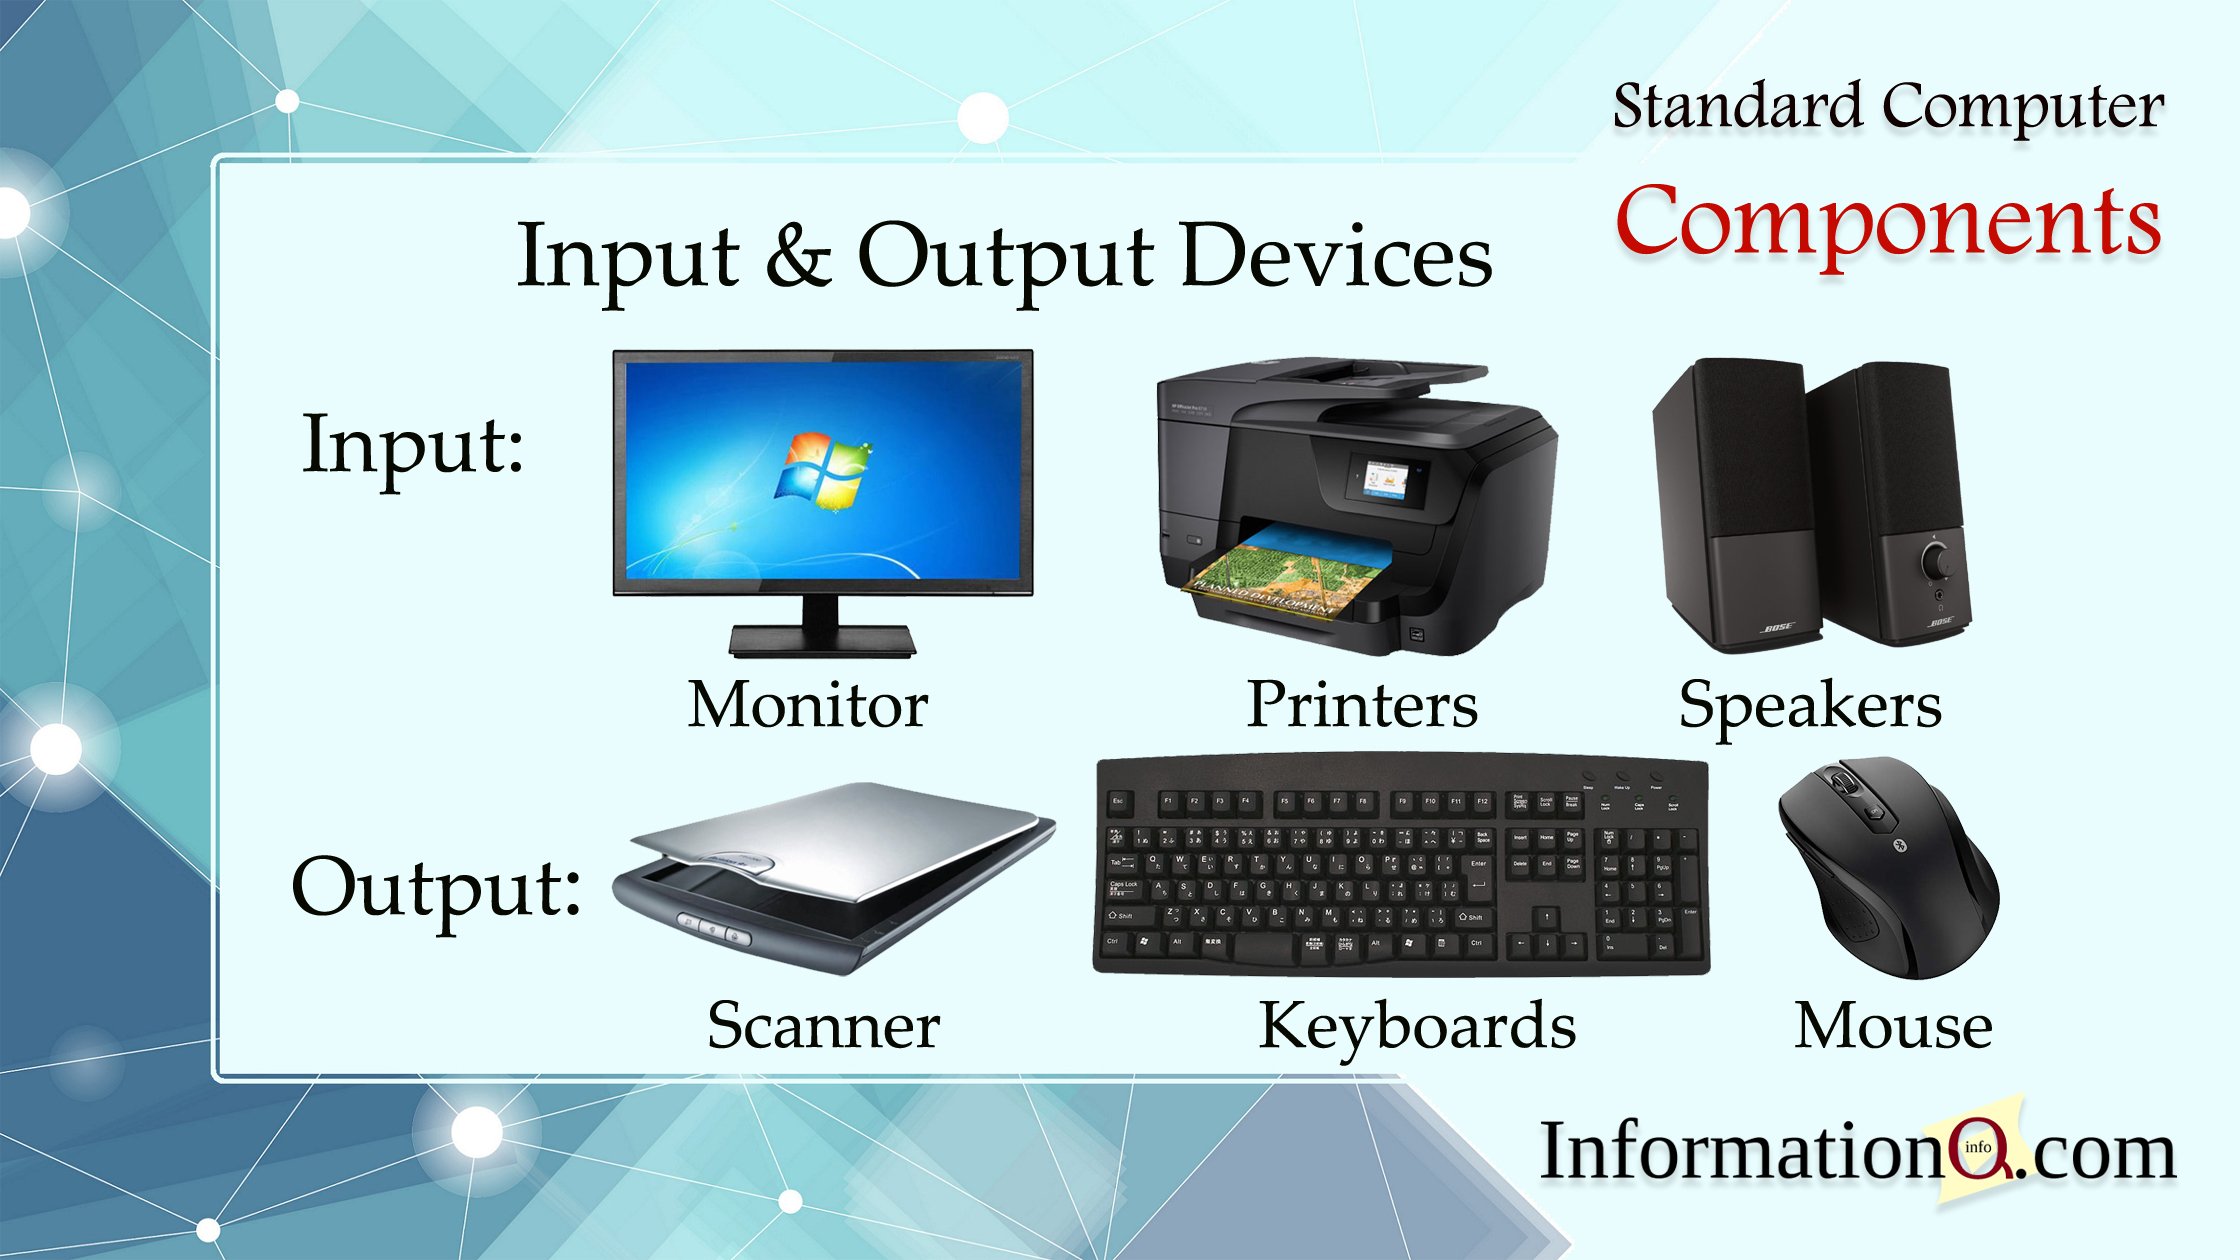 Input components. Computer components. Computer devices слайд. Компьютеры Computer Parts. Input devices of Computer.